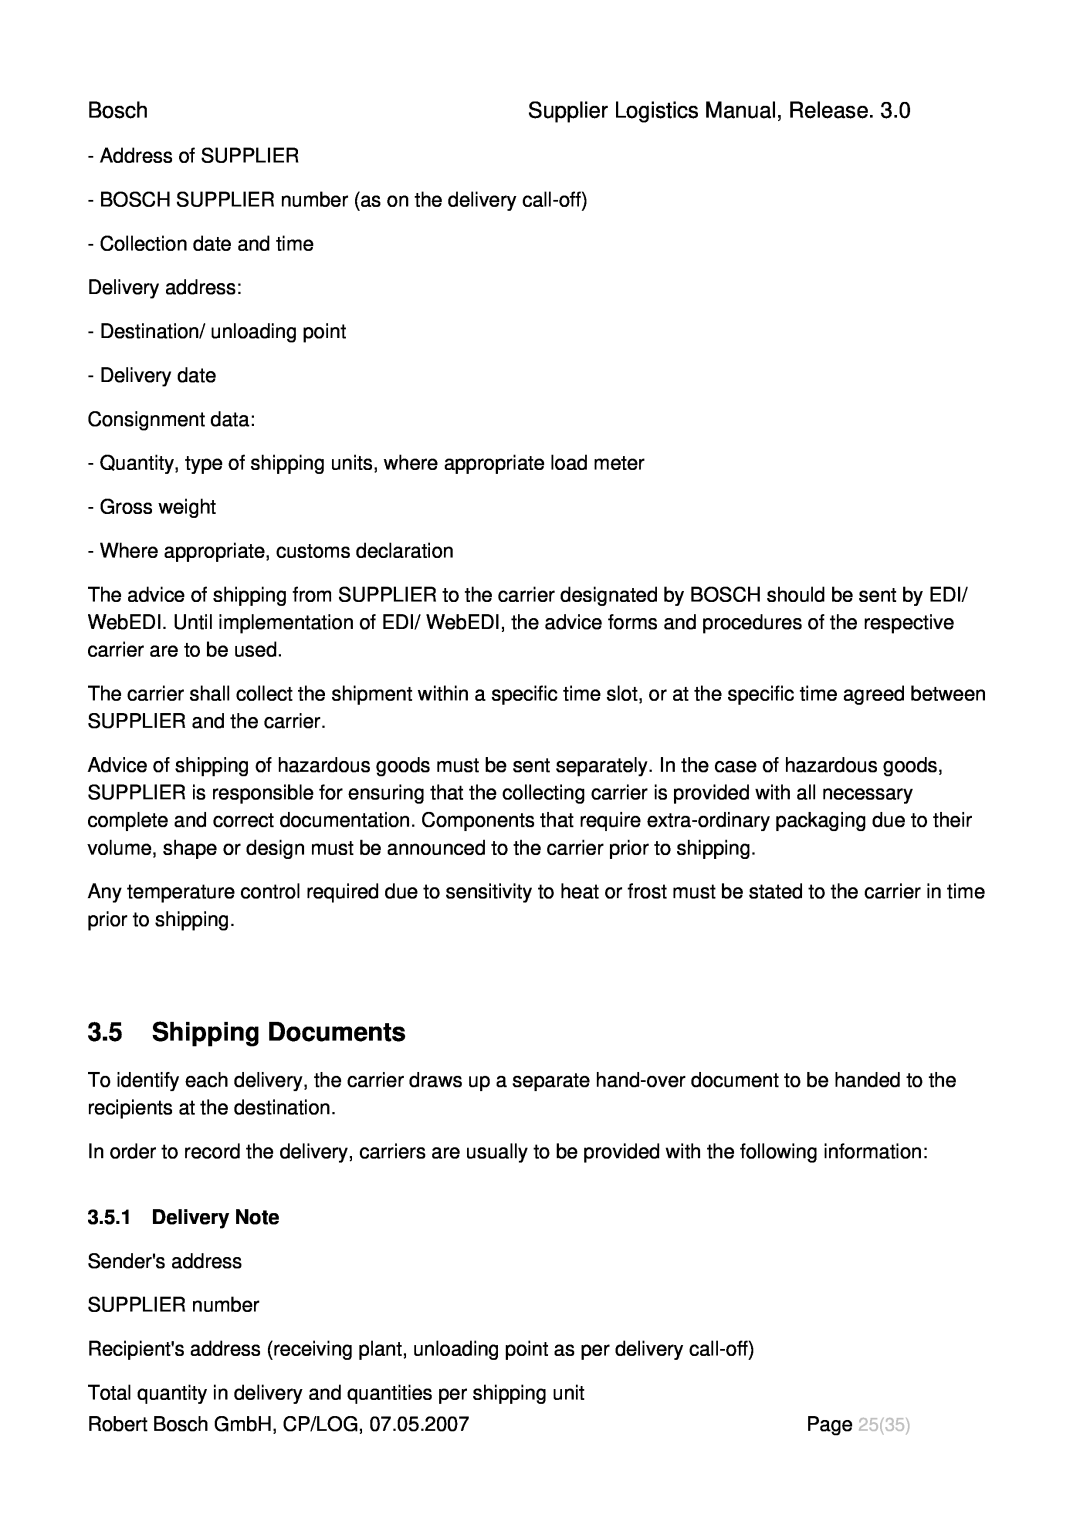 Bosch Appliances manual 3.5Shipping Documents, Delivery Note, Bosch, Supplier Logistics Manual, Release 